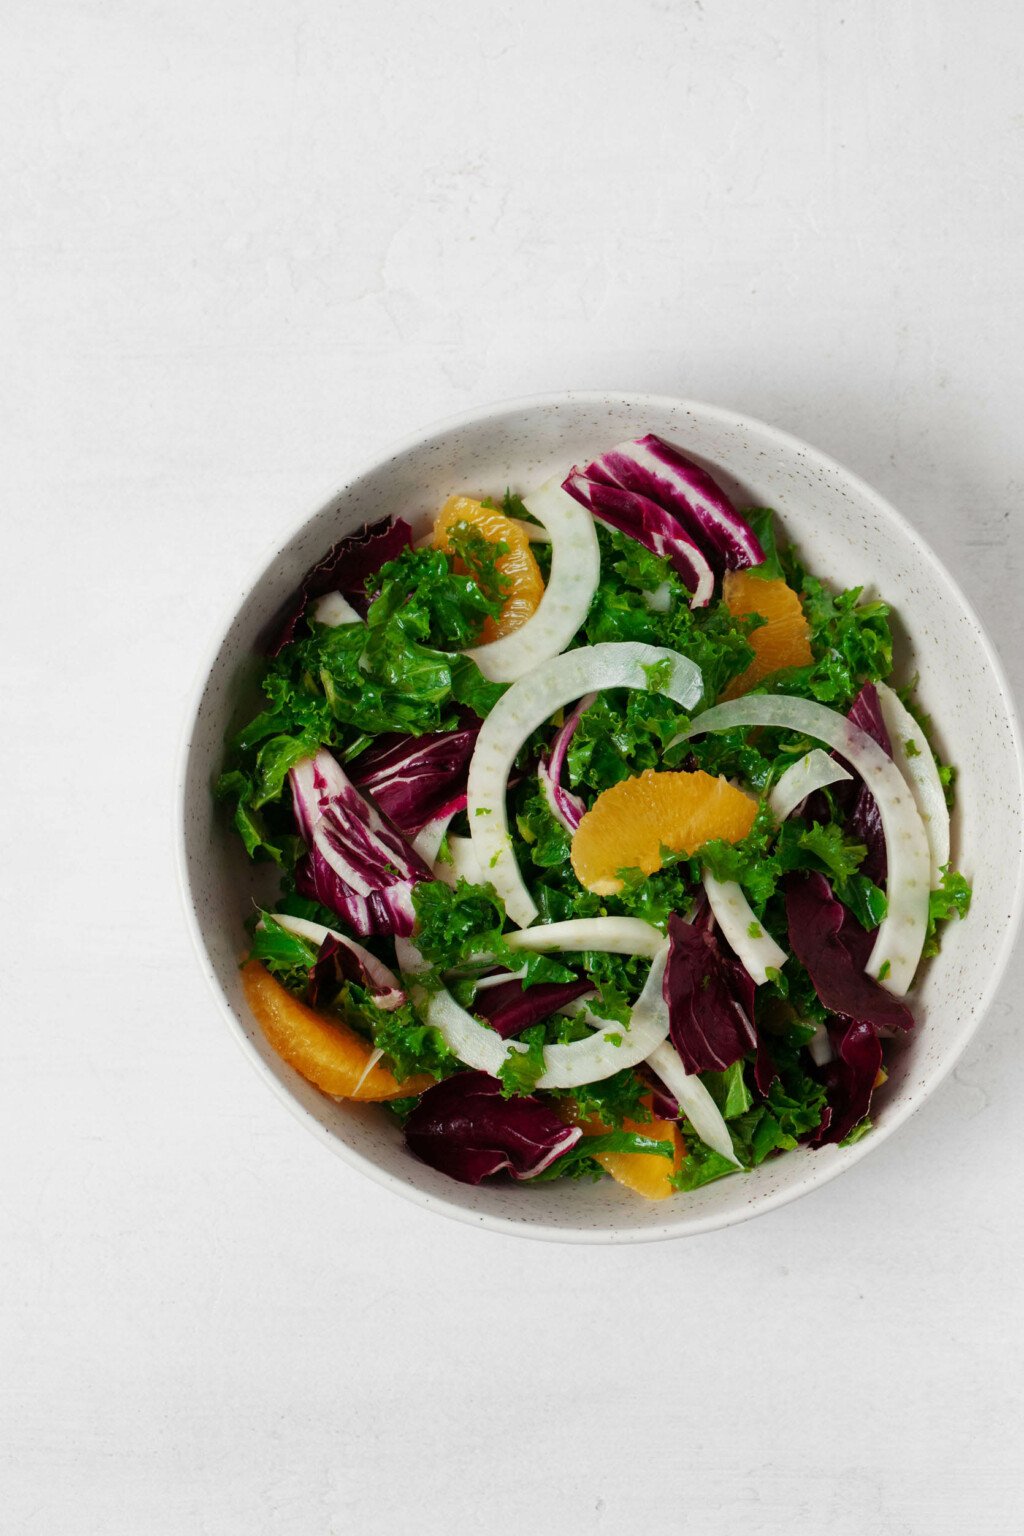 An overhead image of a large white mixing bowl, which is filled with shaved fennel, kale, radicchio, and orange sections.